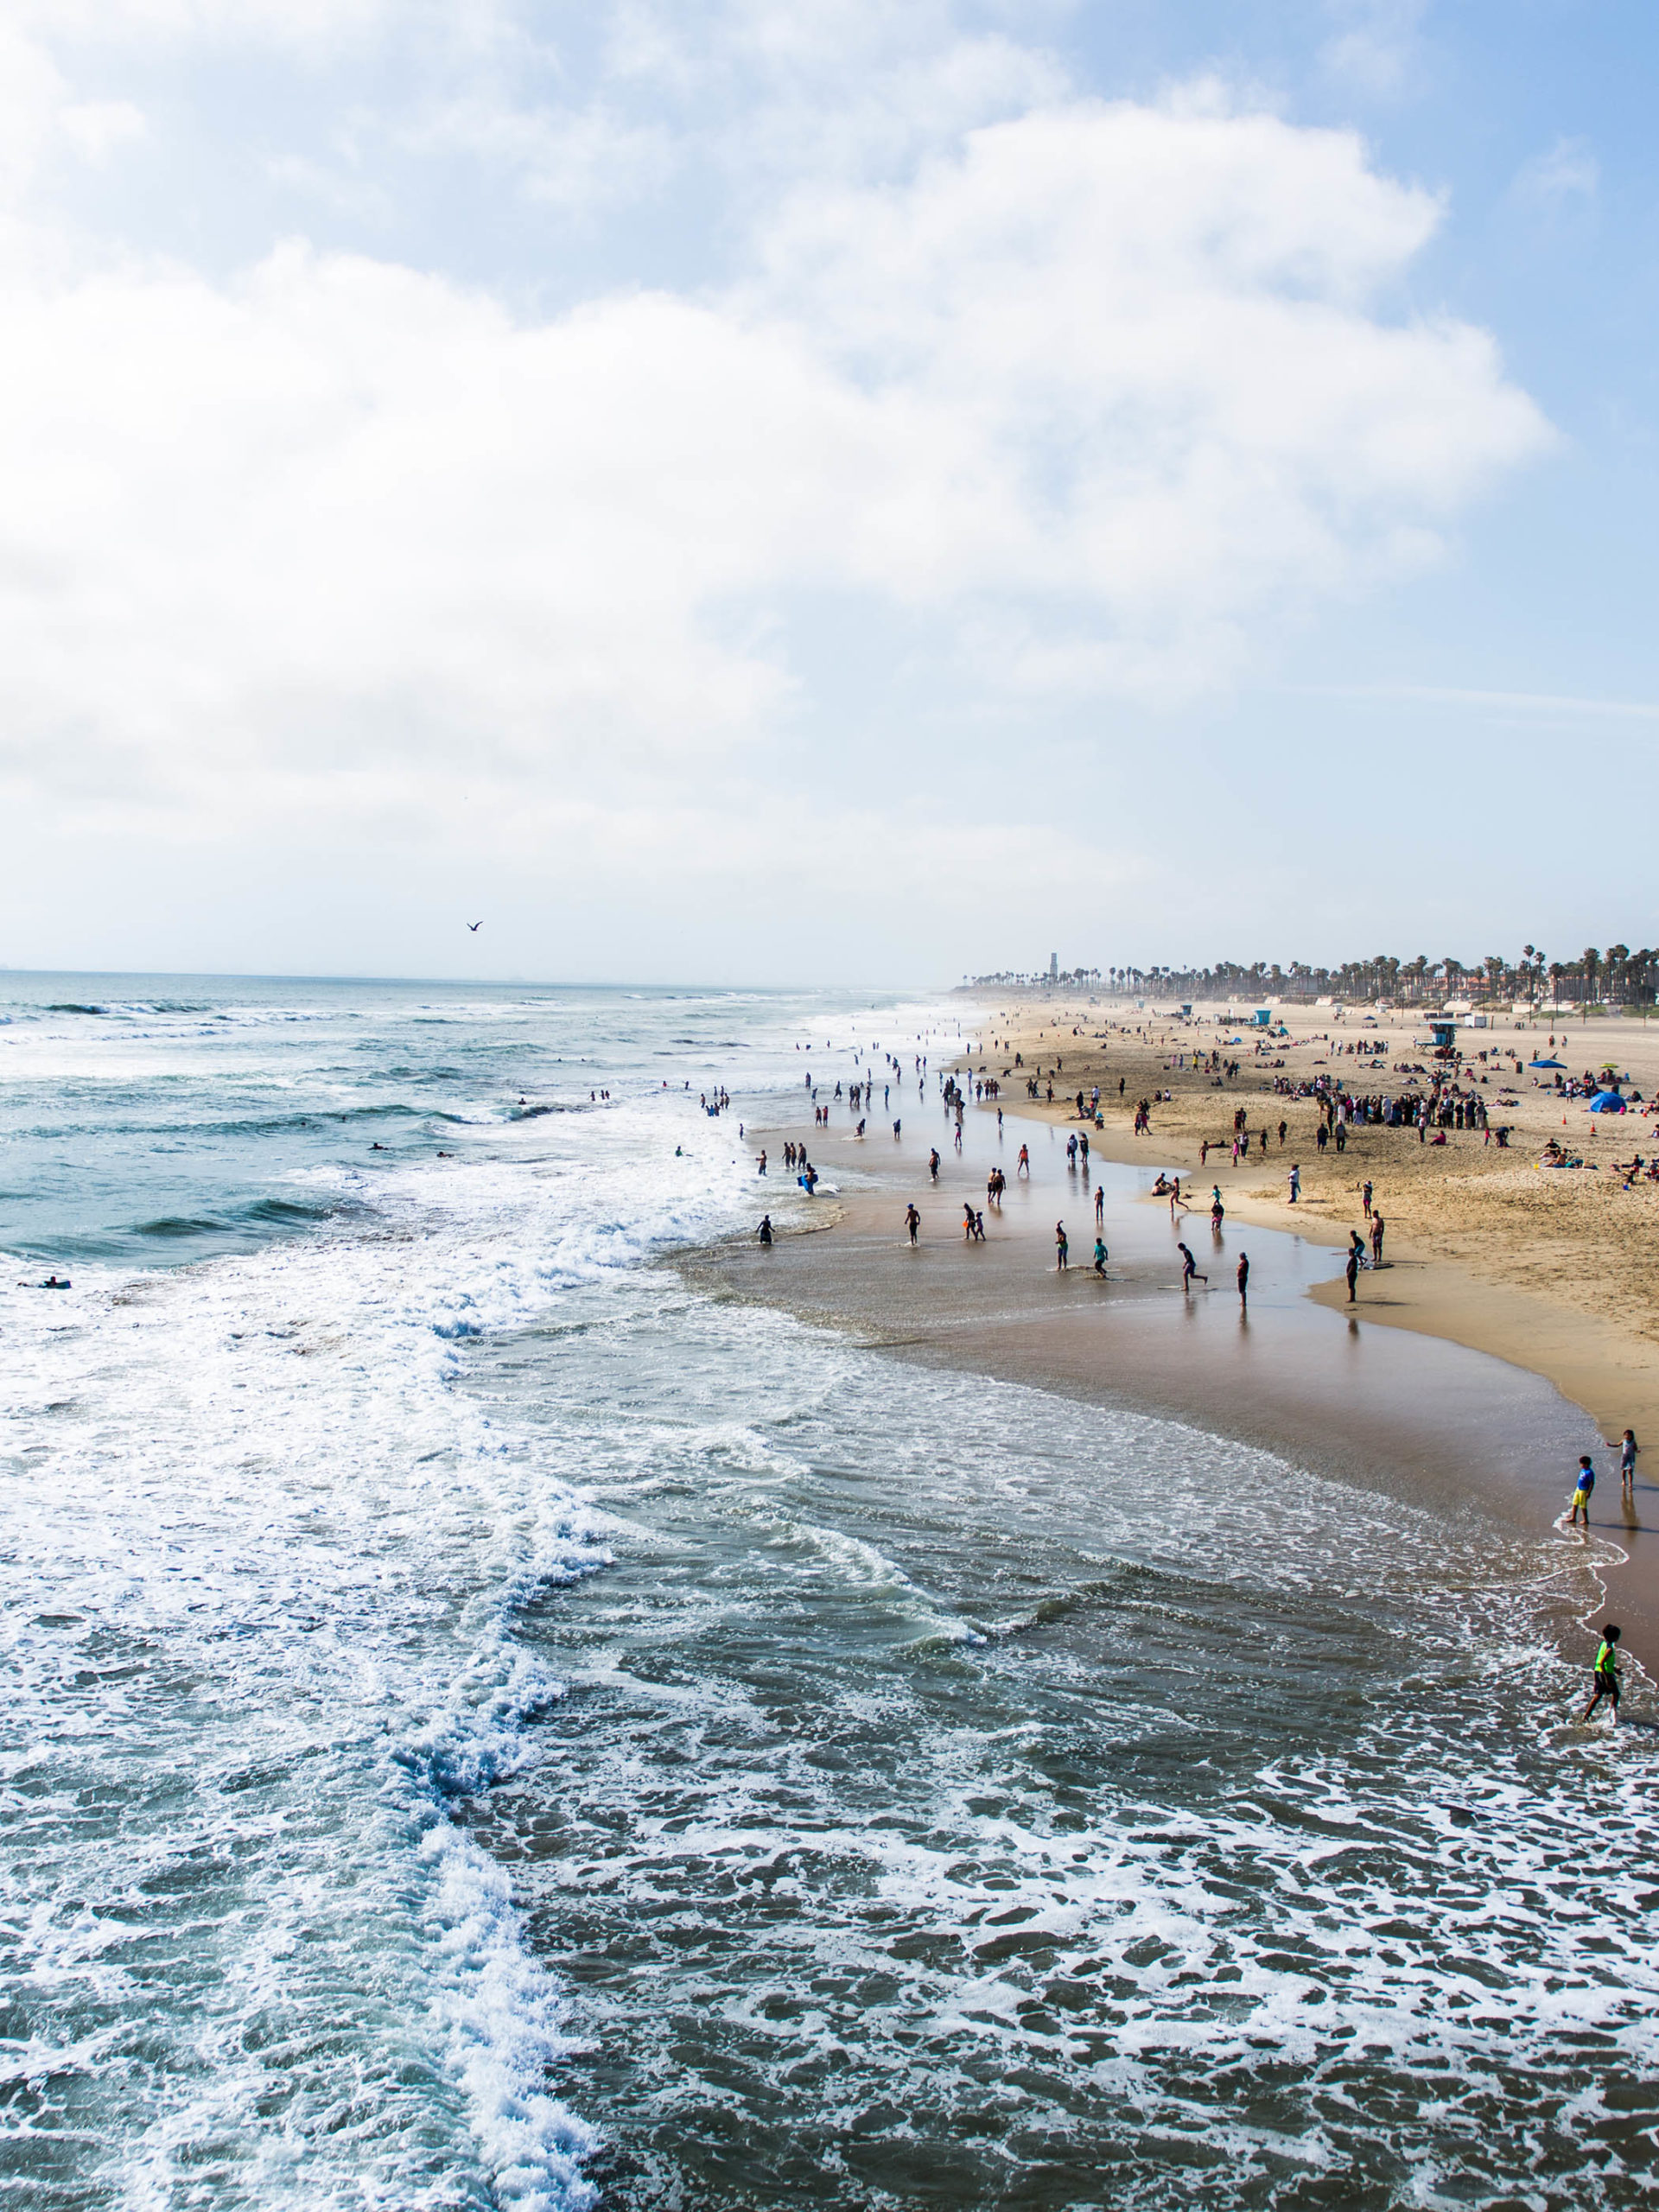 Crowds of tourists and sun bathers having fun and swimming at Huntington Beach